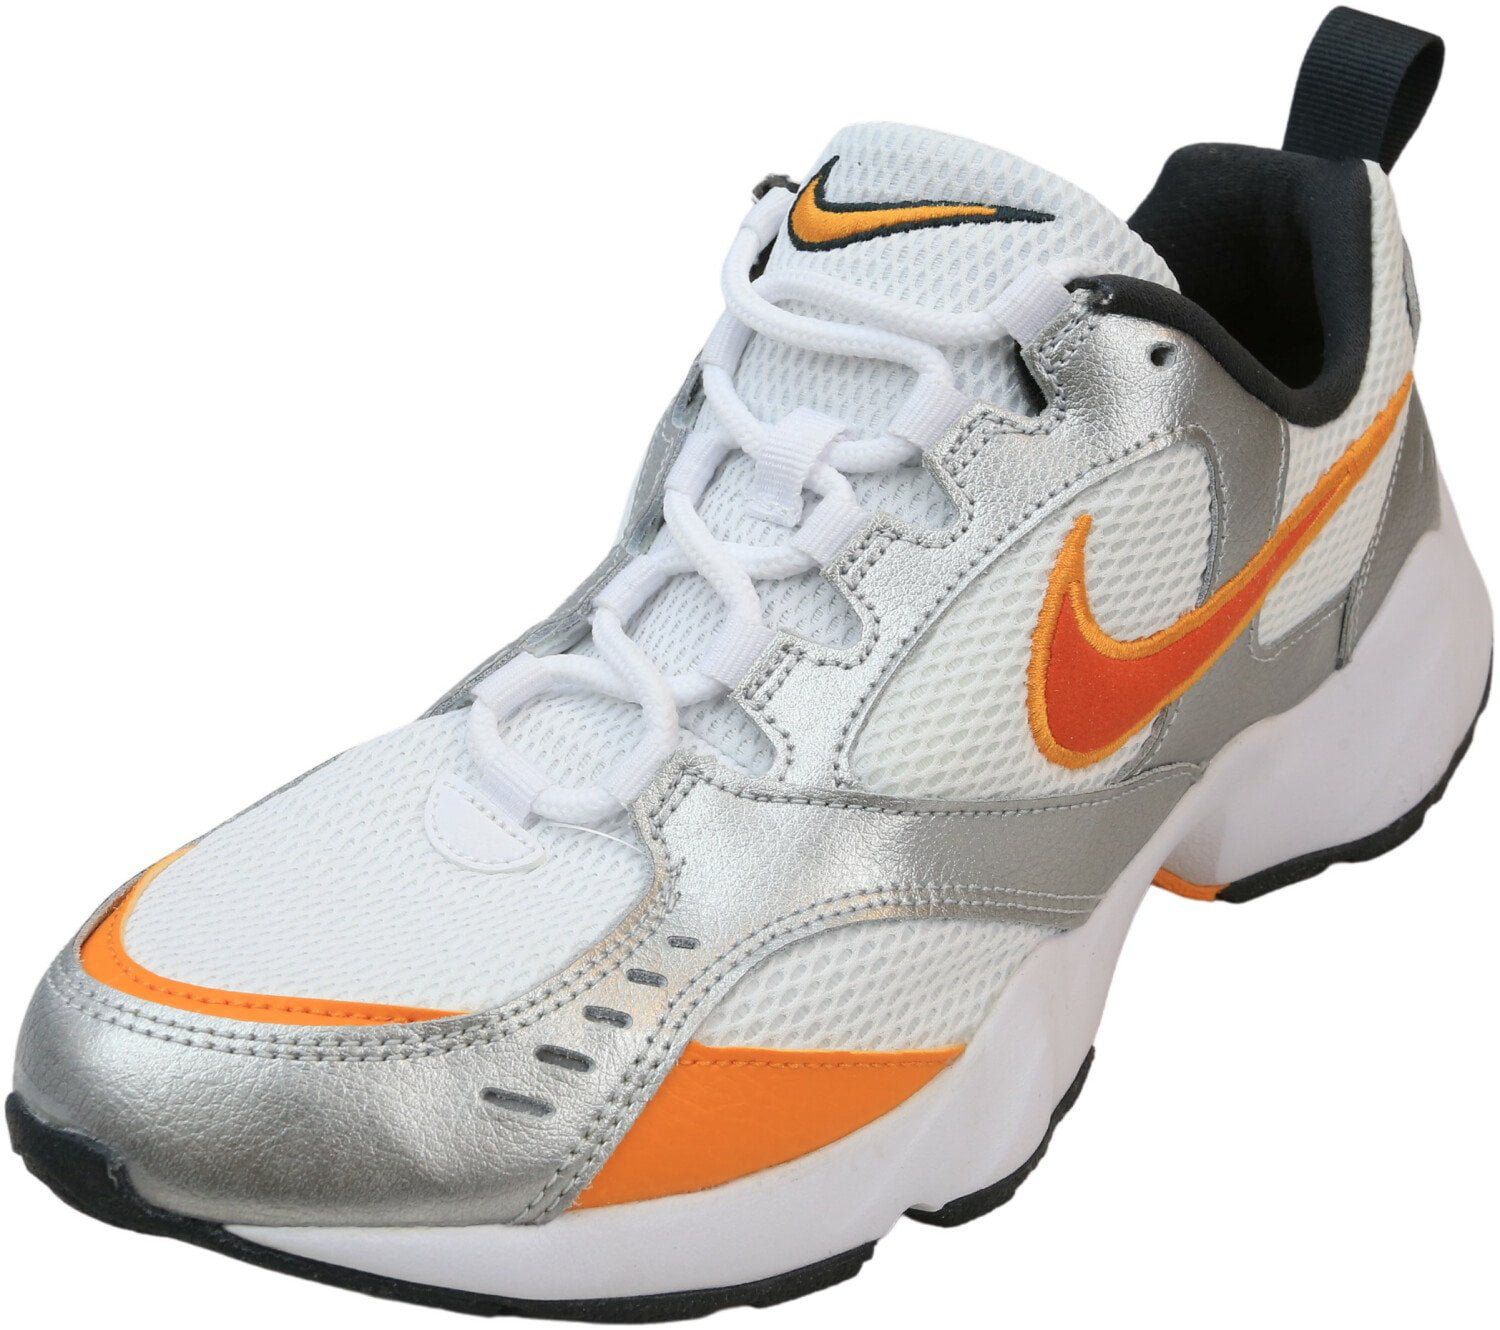 are nike air heights good for running